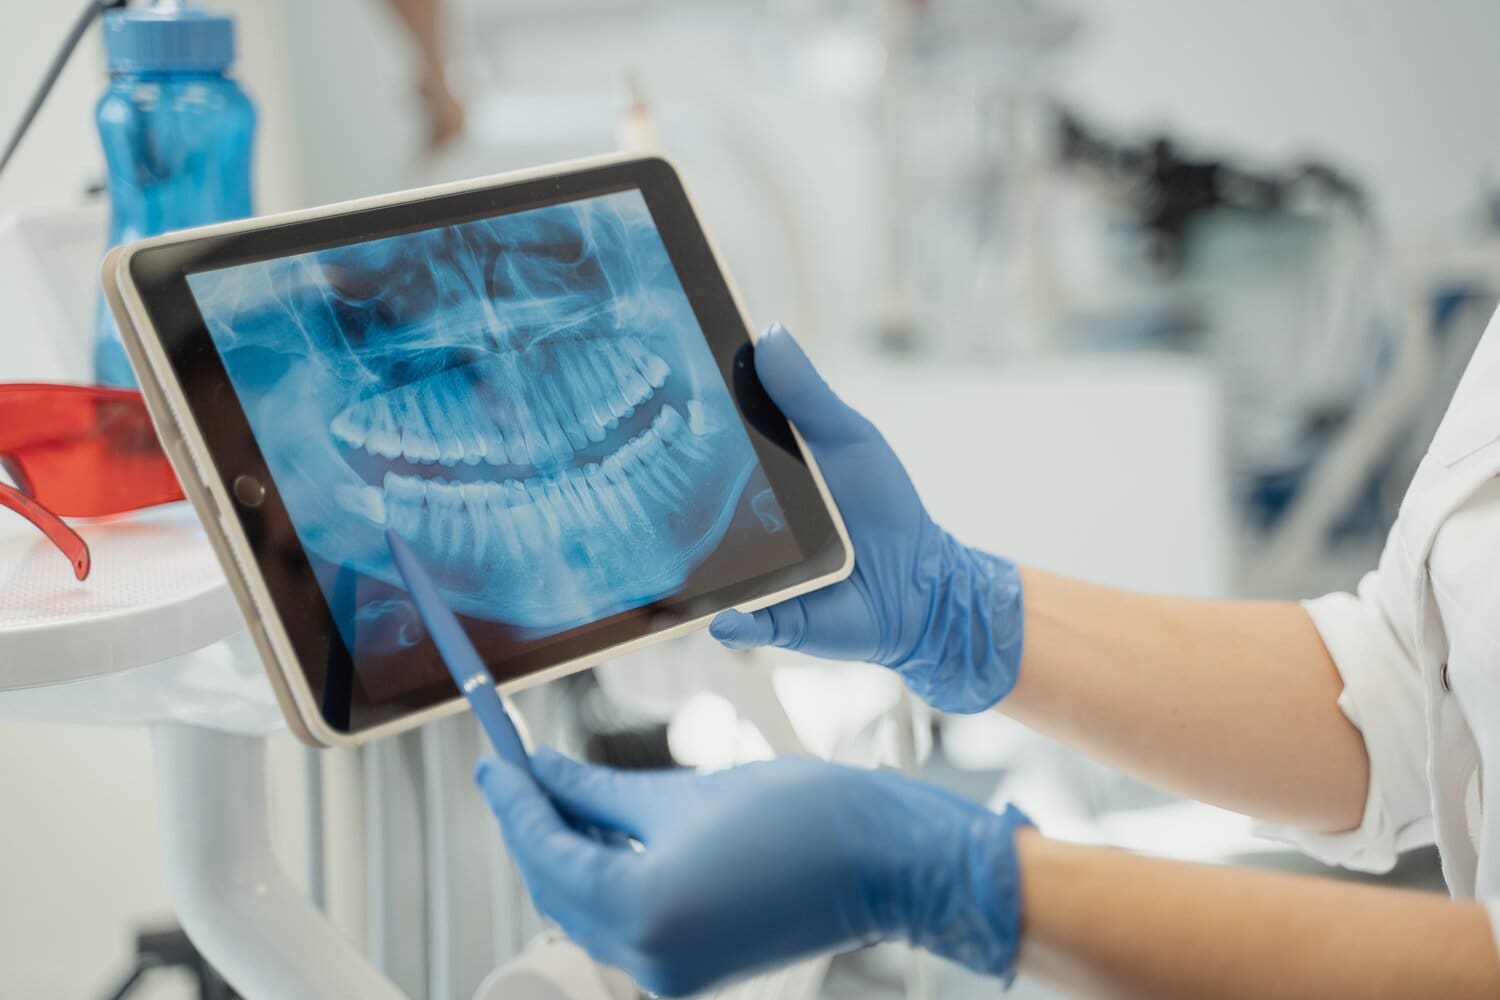 Tooth Extraction Preparation X-ray